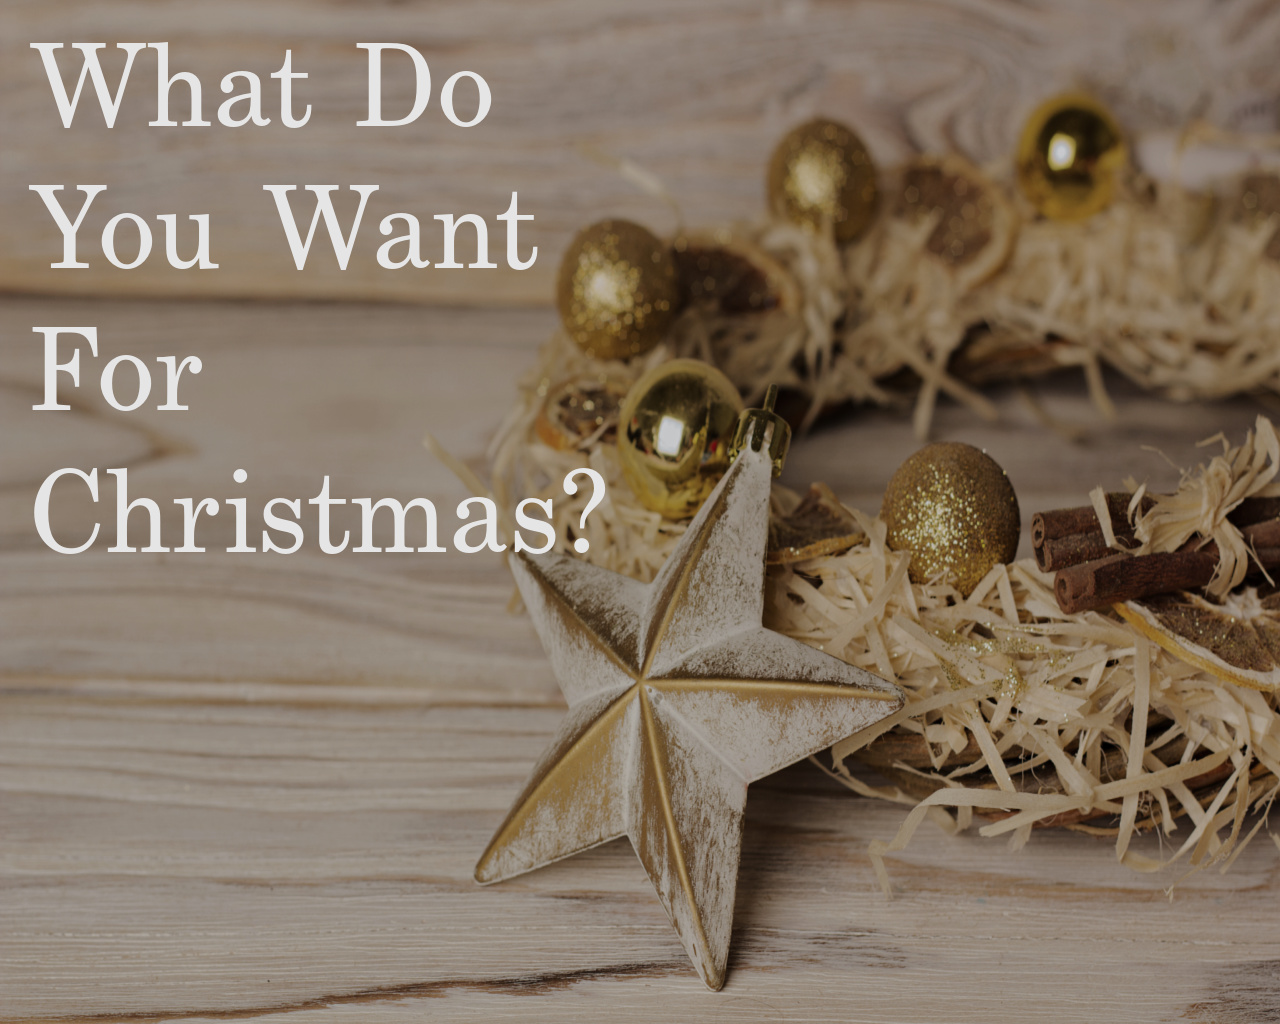 What Do You Want For Christmas?